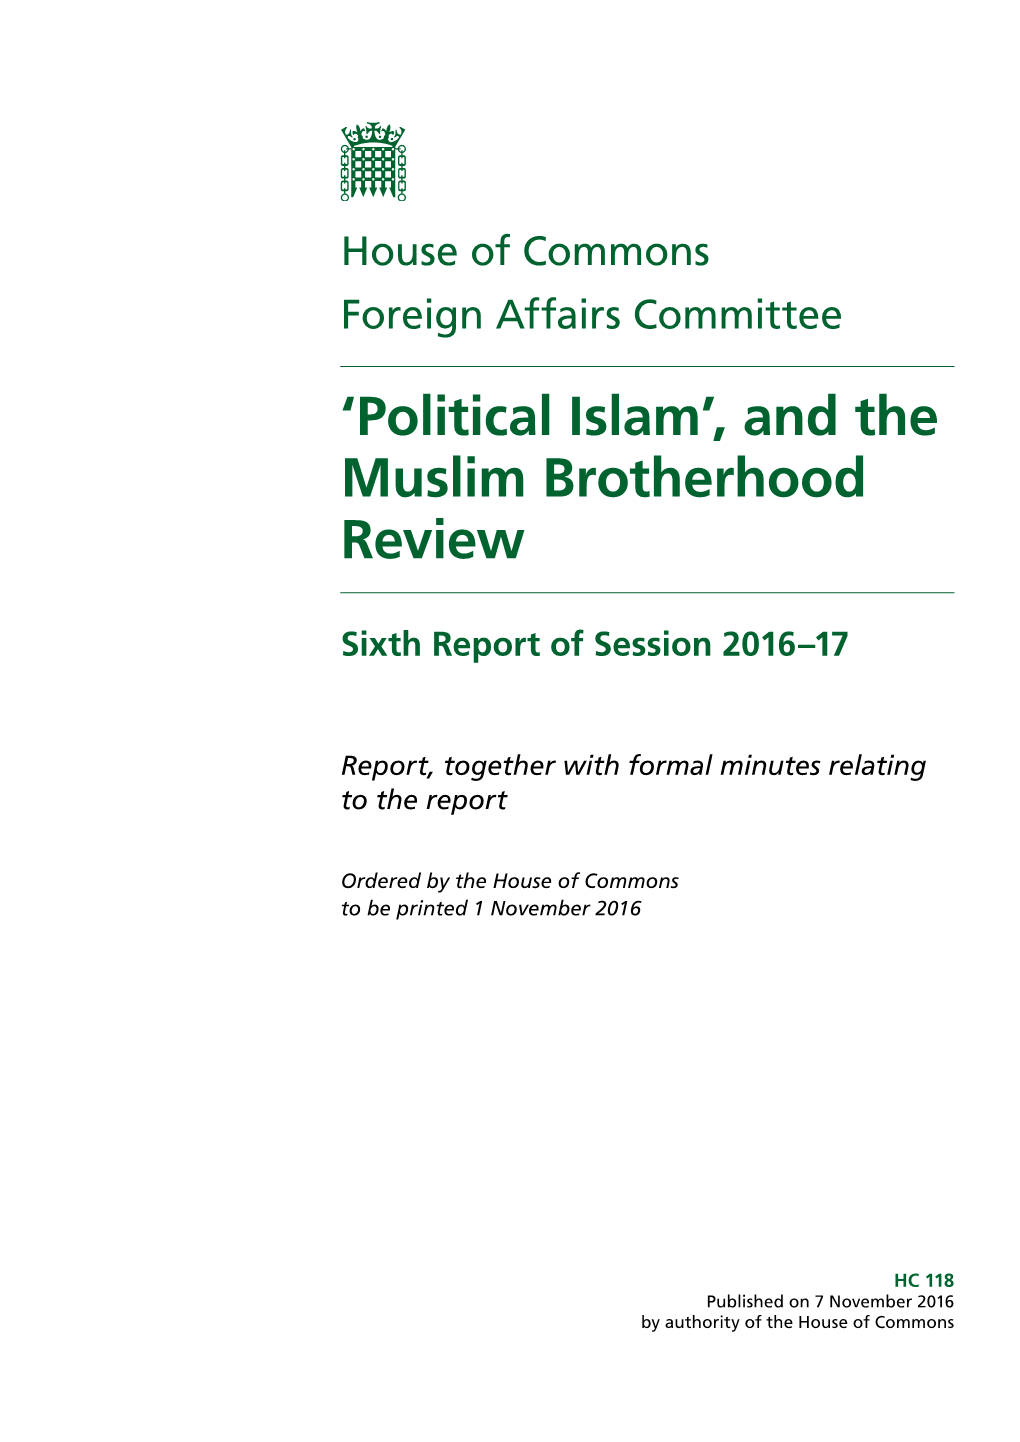 'Political Islam', and the Muslim Brotherhood Review